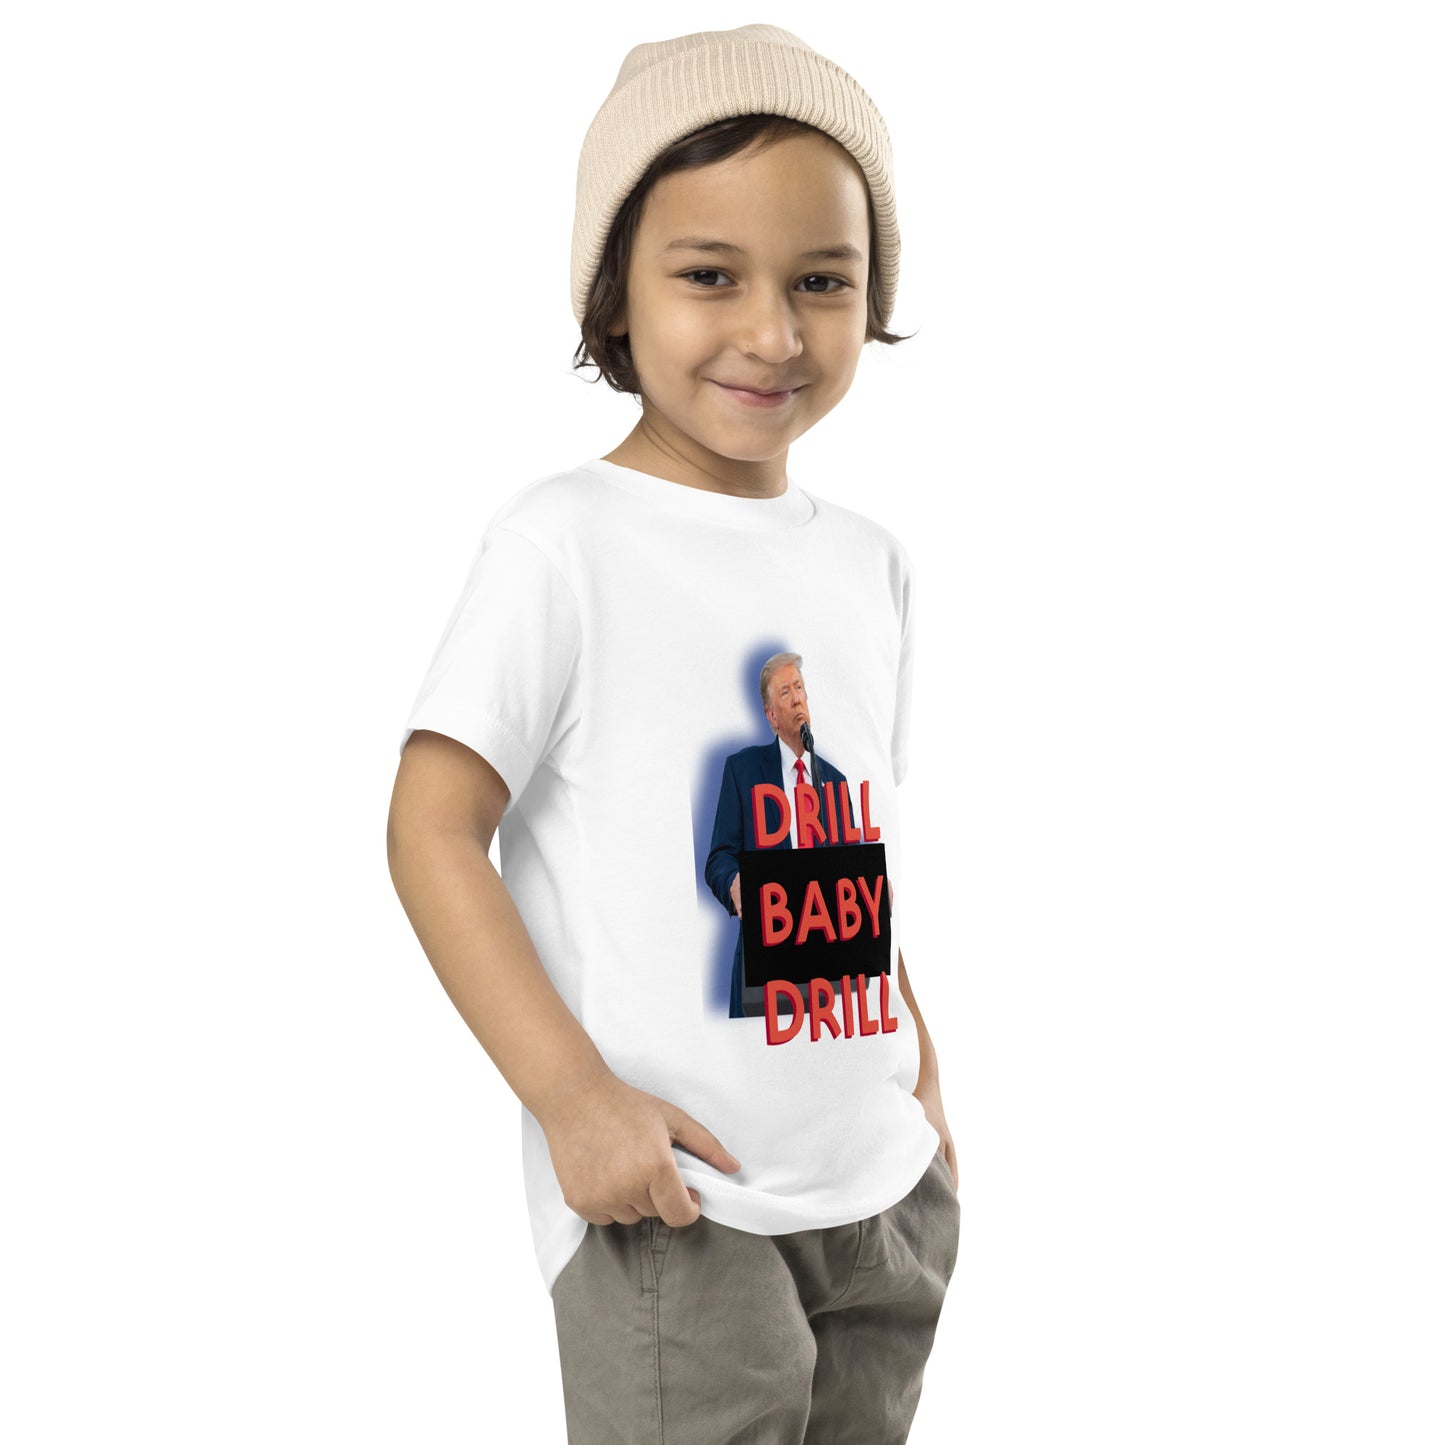 DRILL BABY DRILL Toddler Short Sleeve Tee